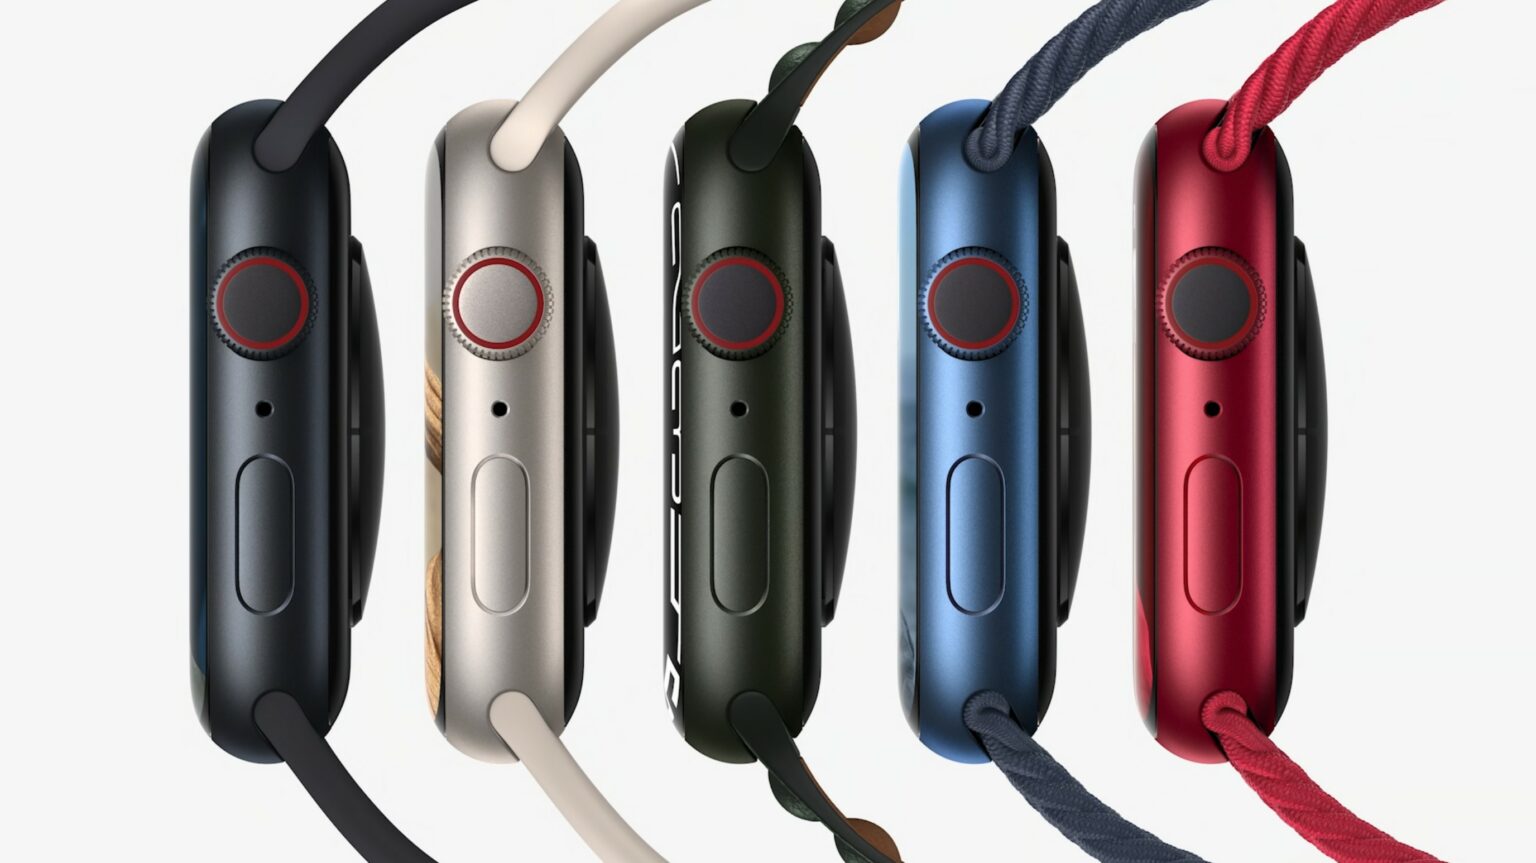 The aluminum Apple Watch Series 7 comes in five colors.